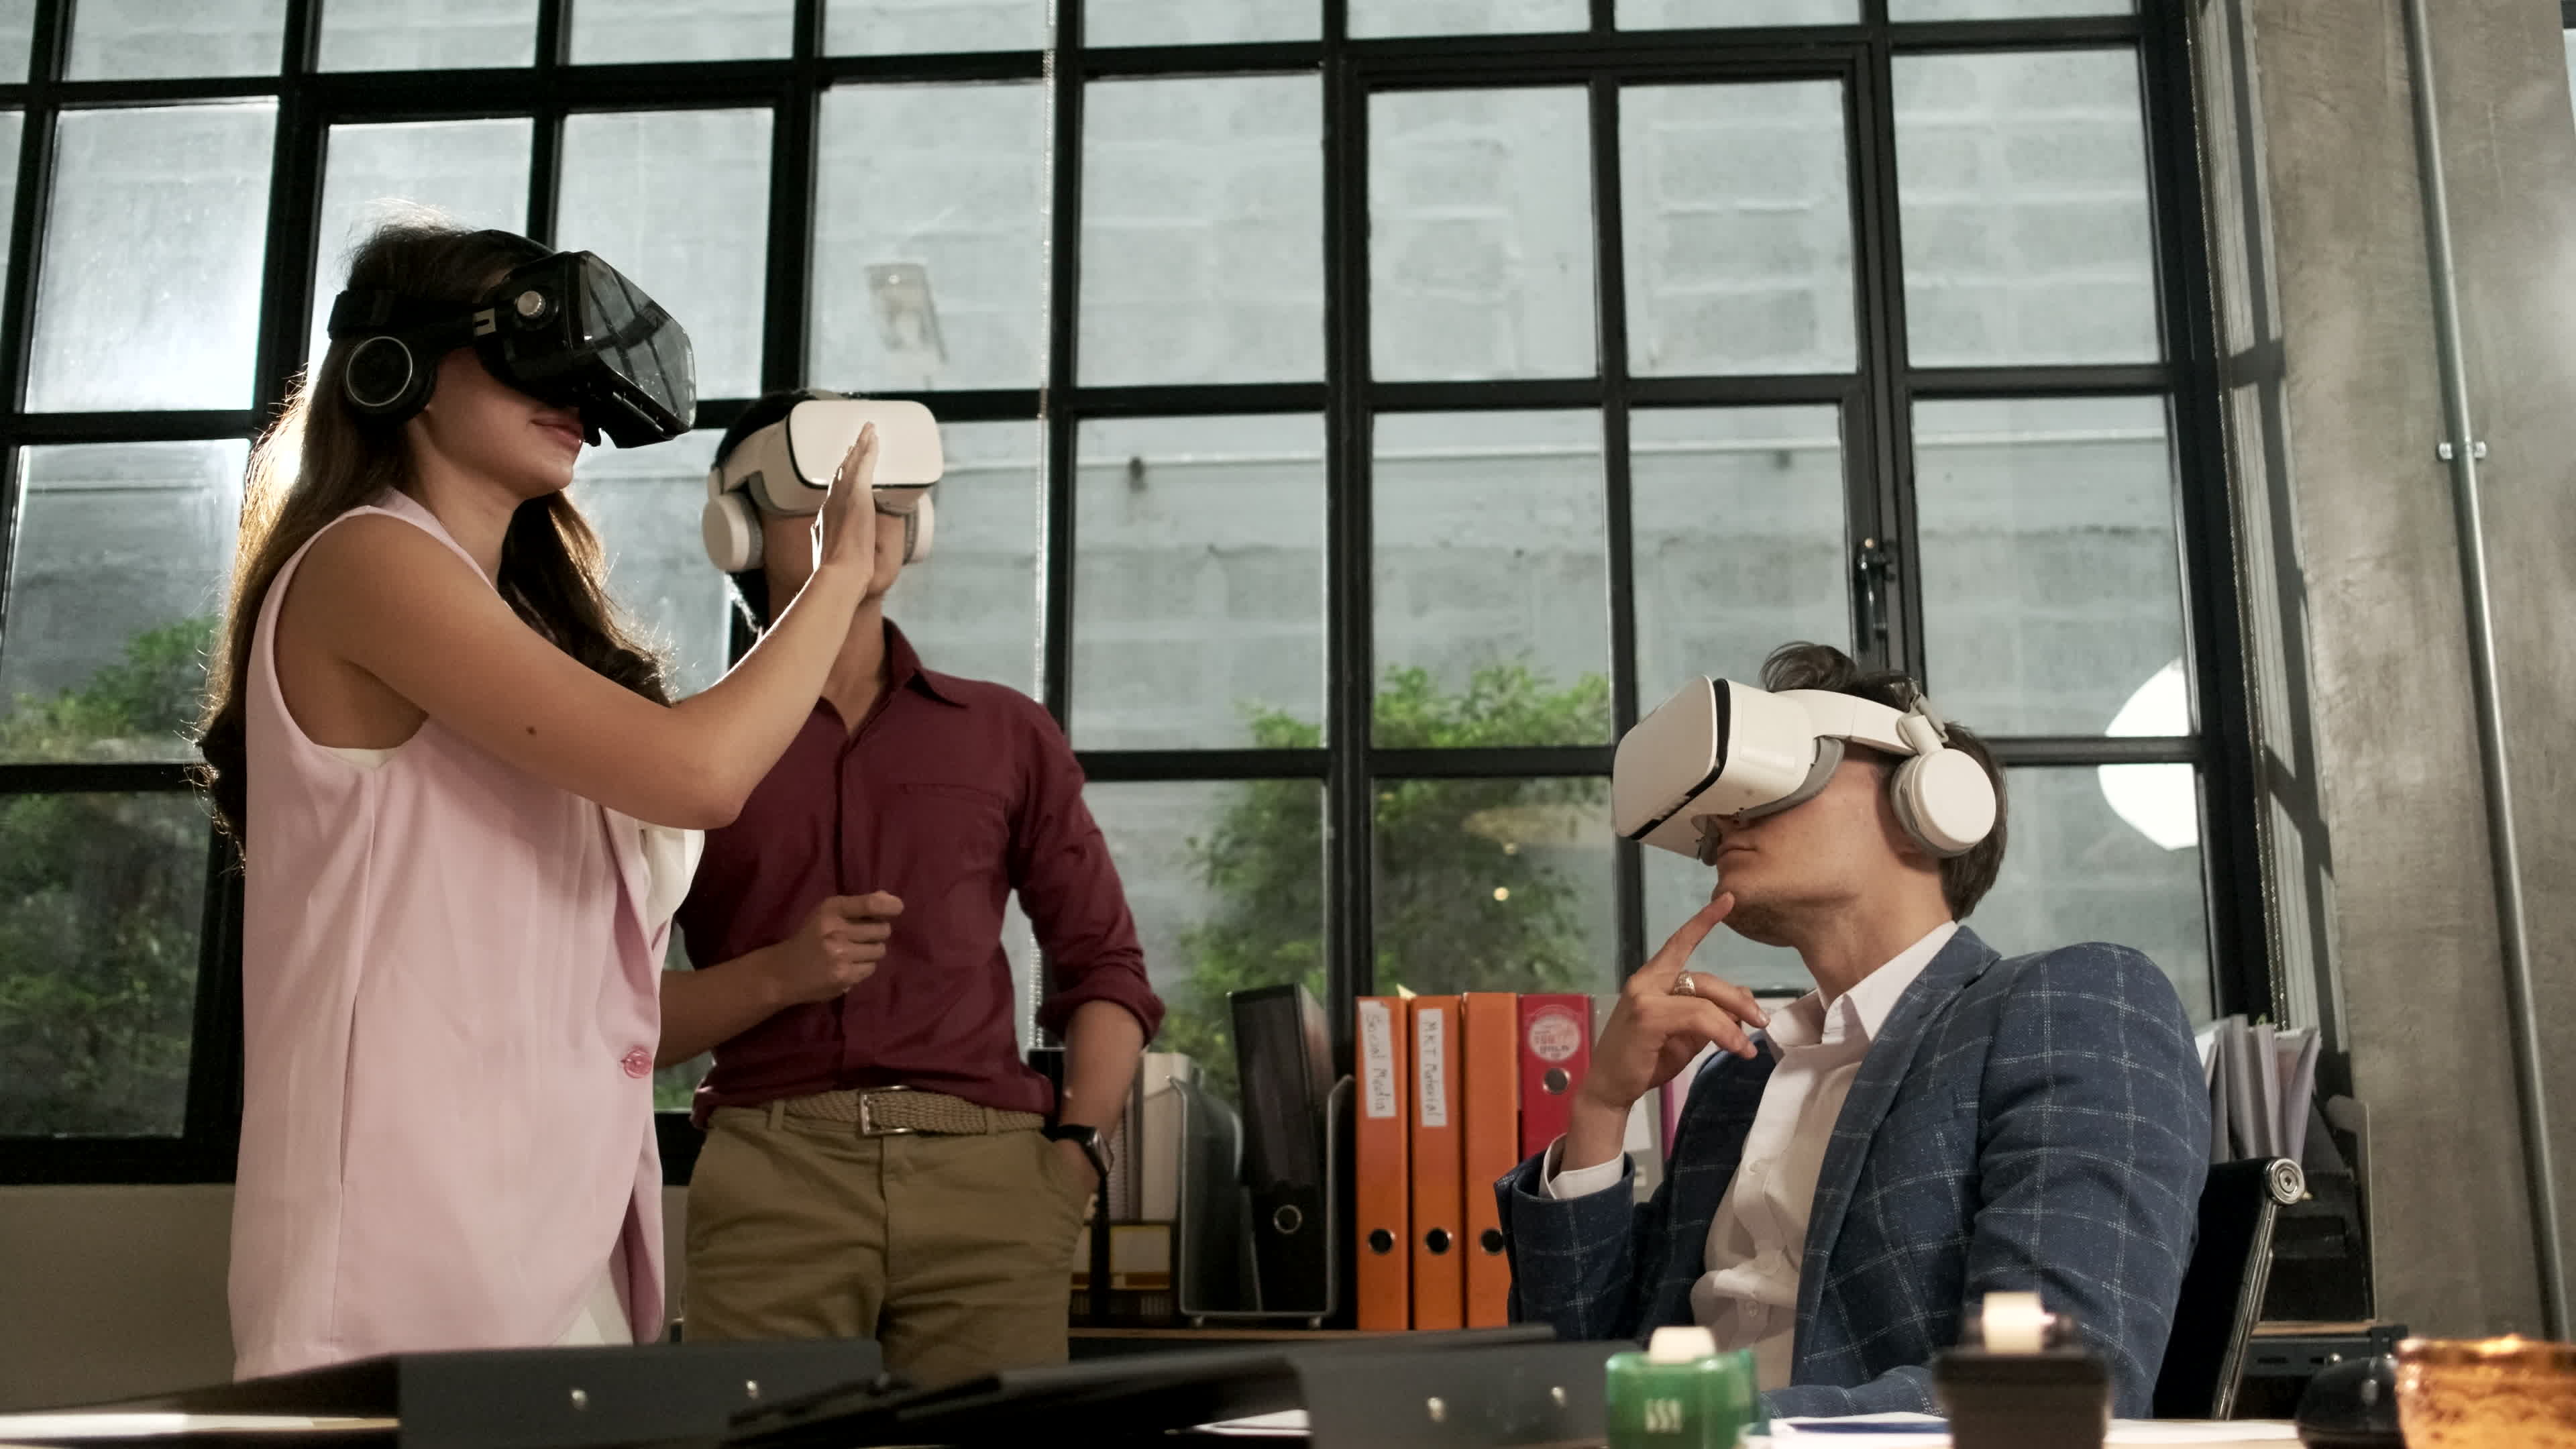 VR headset simulation, Futuristic workspace, Interactive touch experience, Cutting-edge technology, 3840x2160 4K Desktop